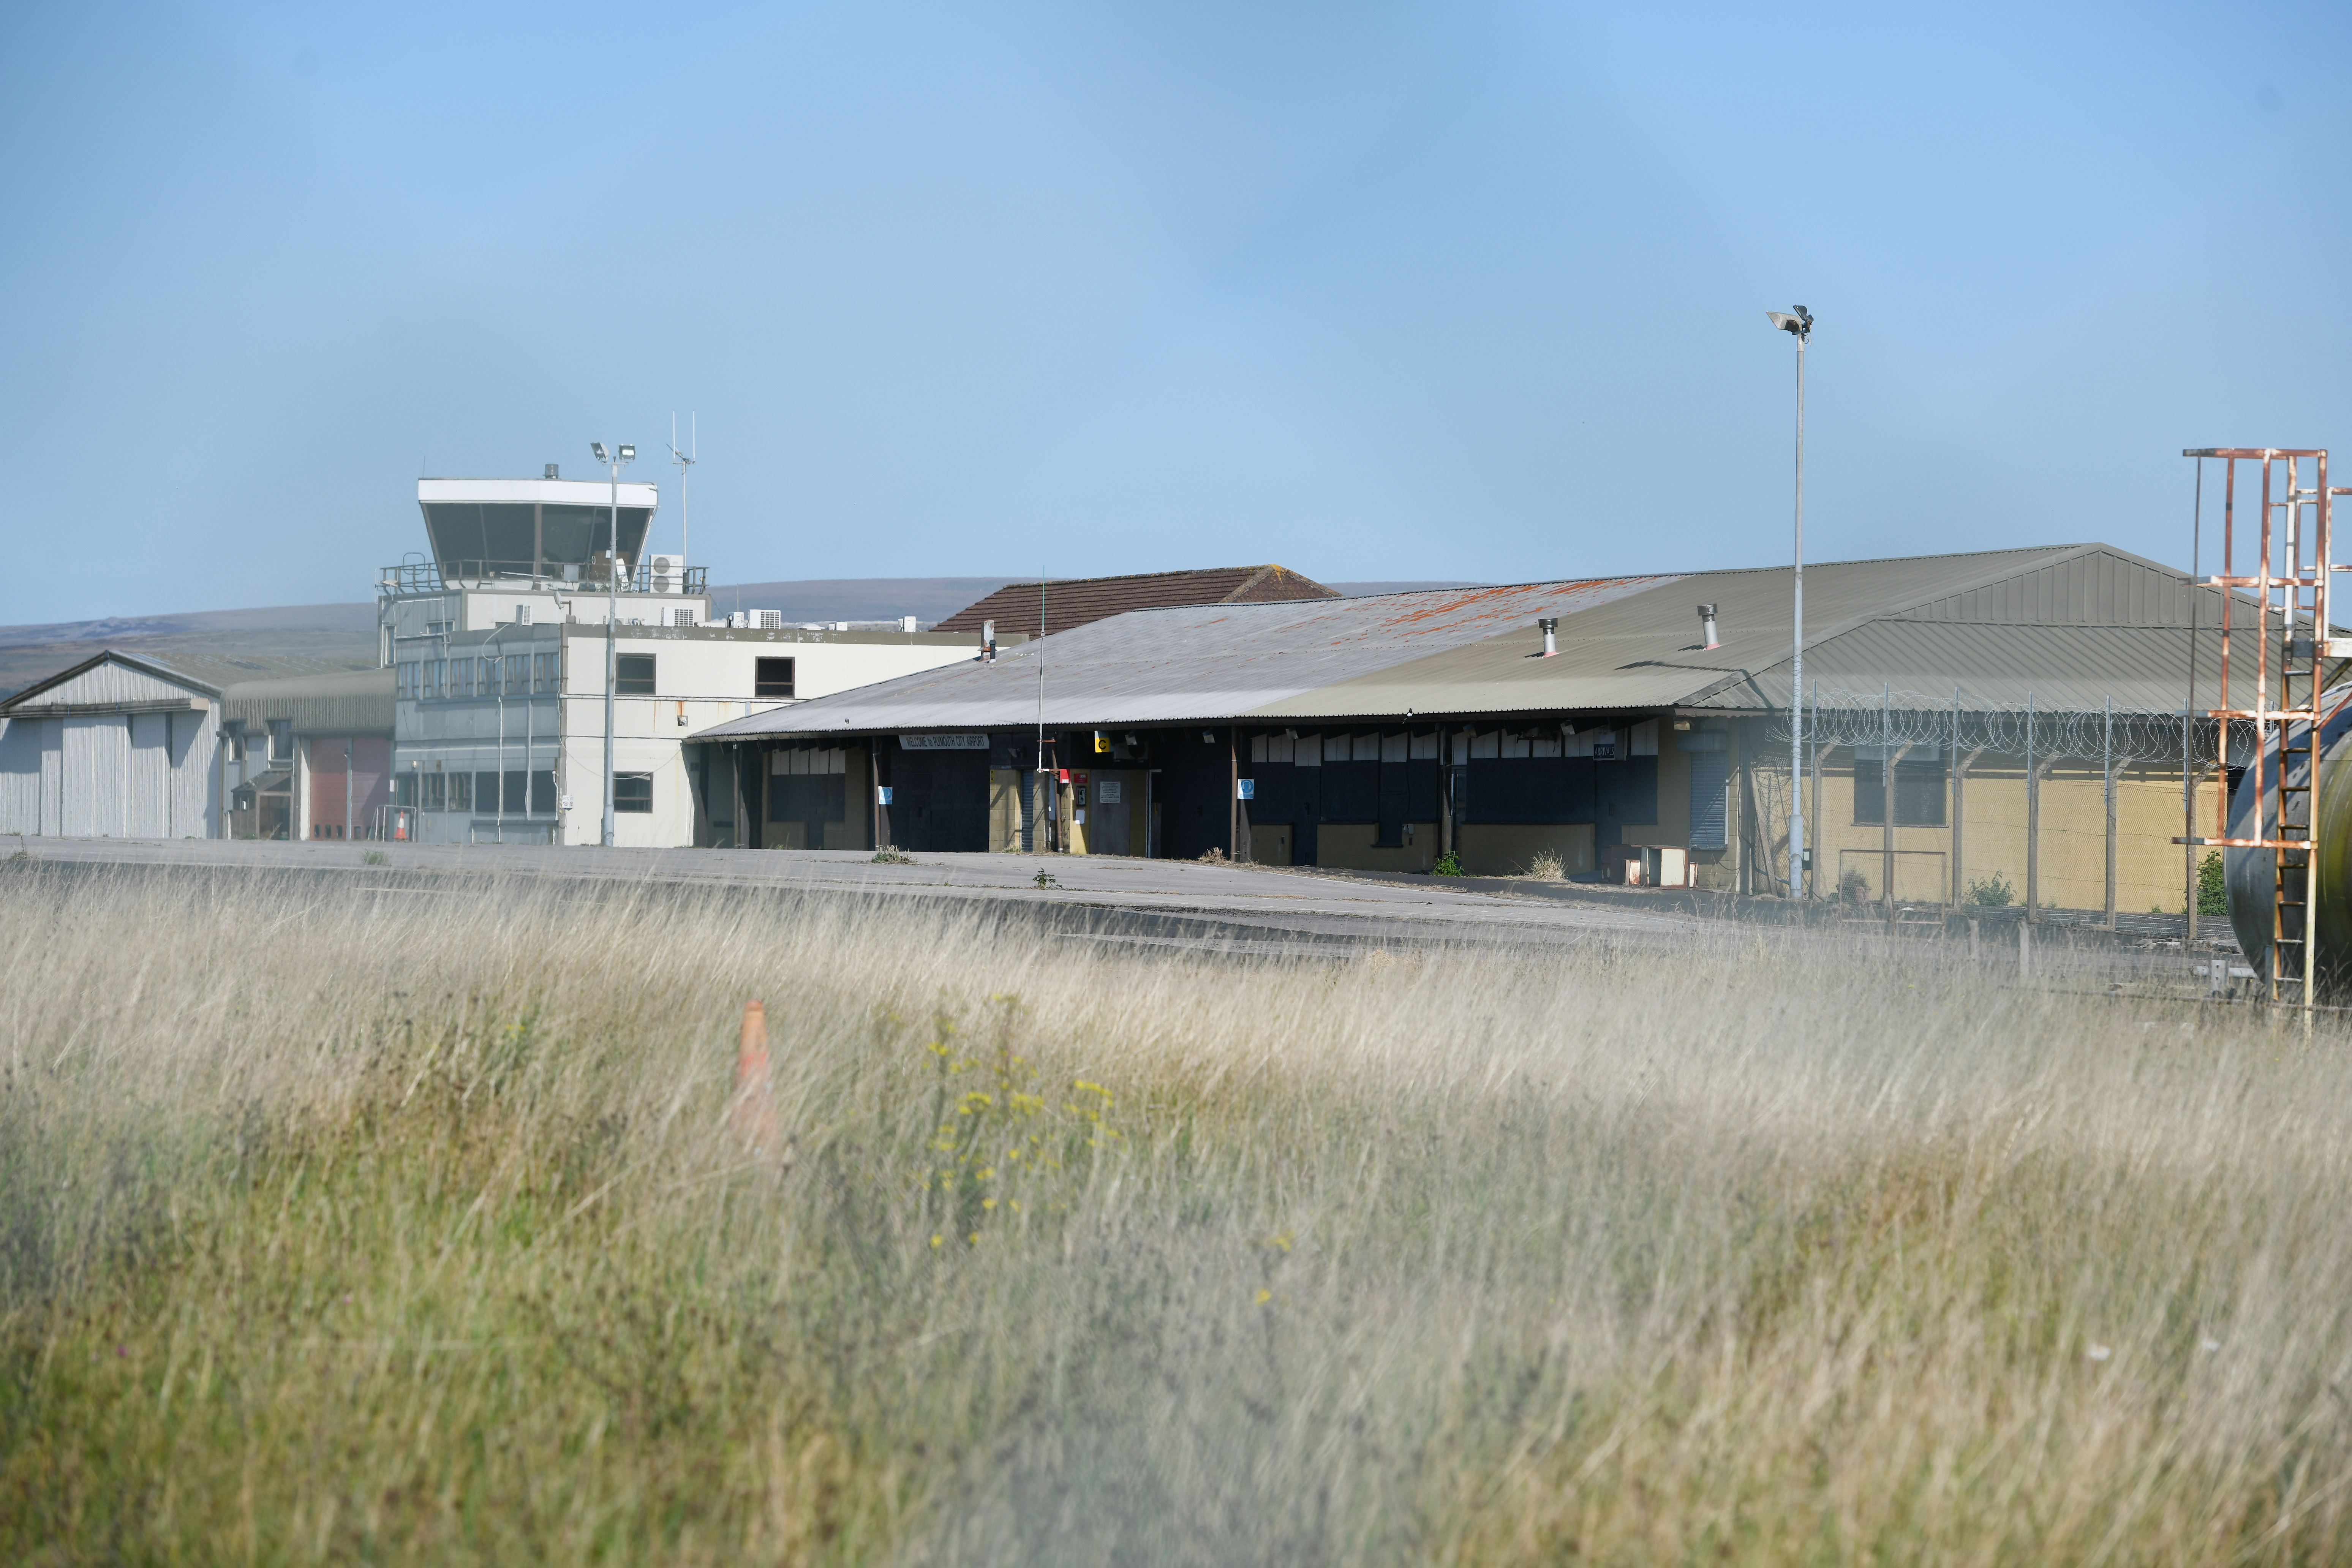 Locals have accused the council of being dishonest over the airport's chances of reopening